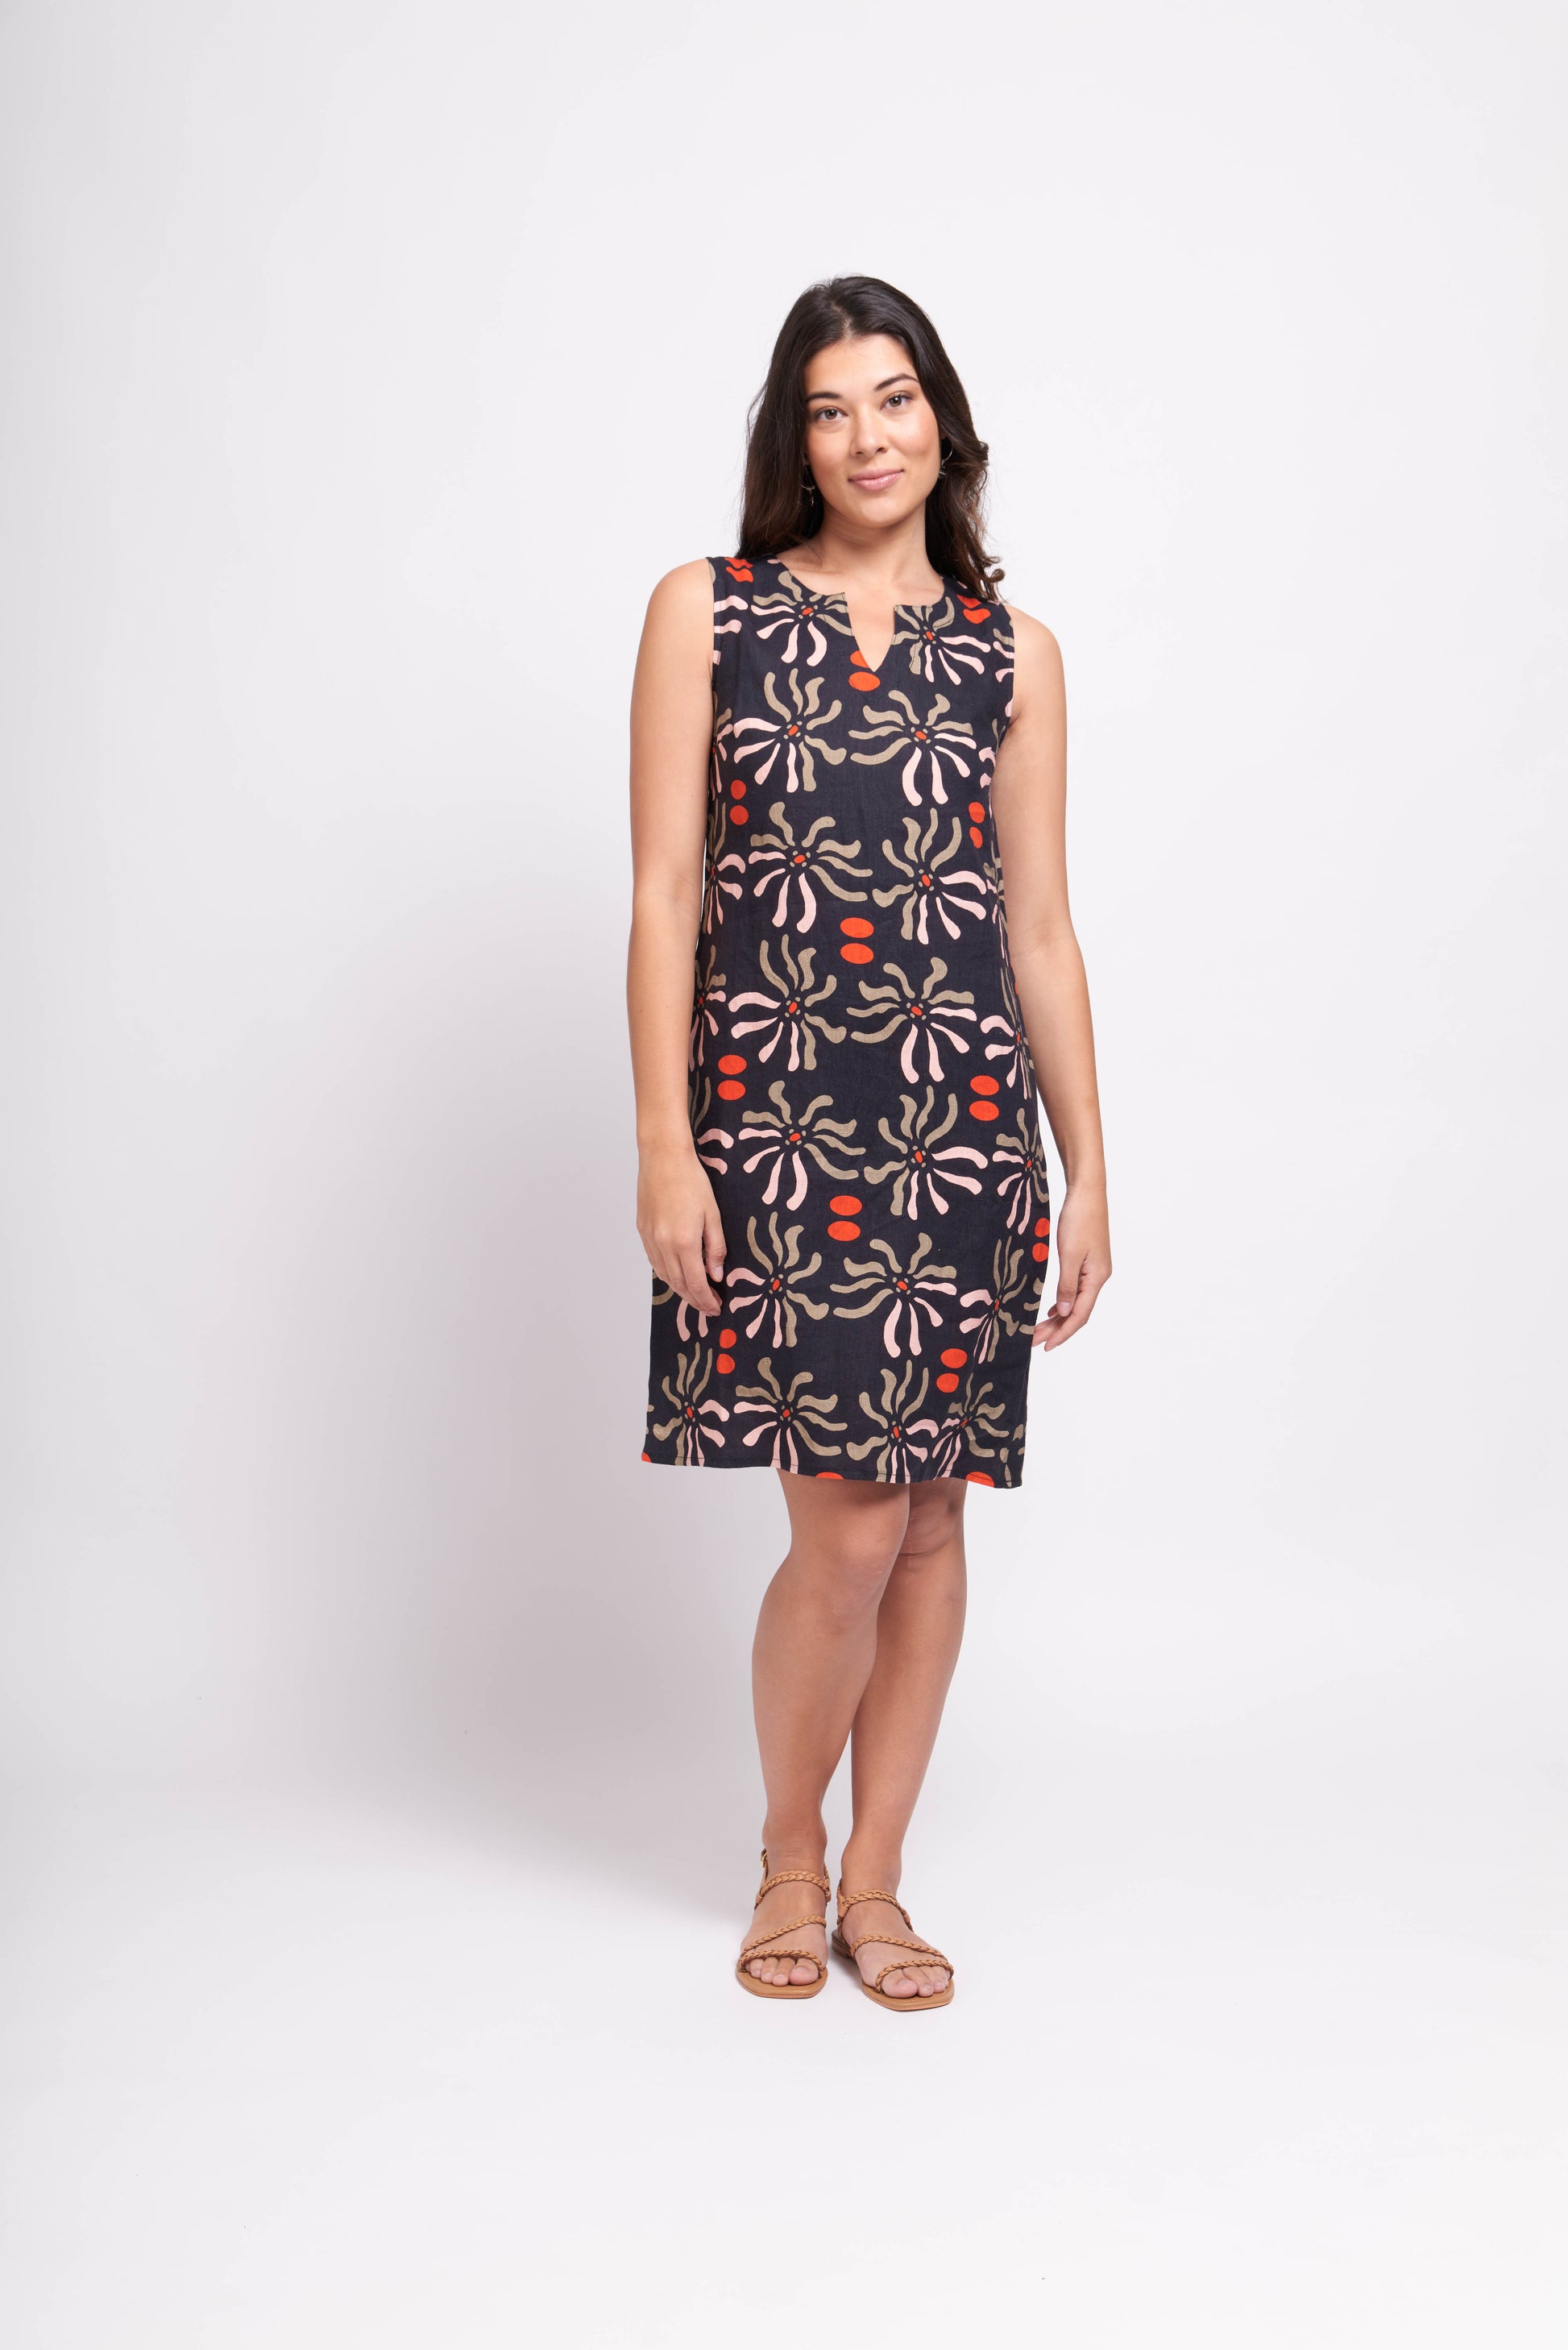 A woman in a Foil Floral Sun Keyhole Dress with Pockets and sandals standing against a white background.